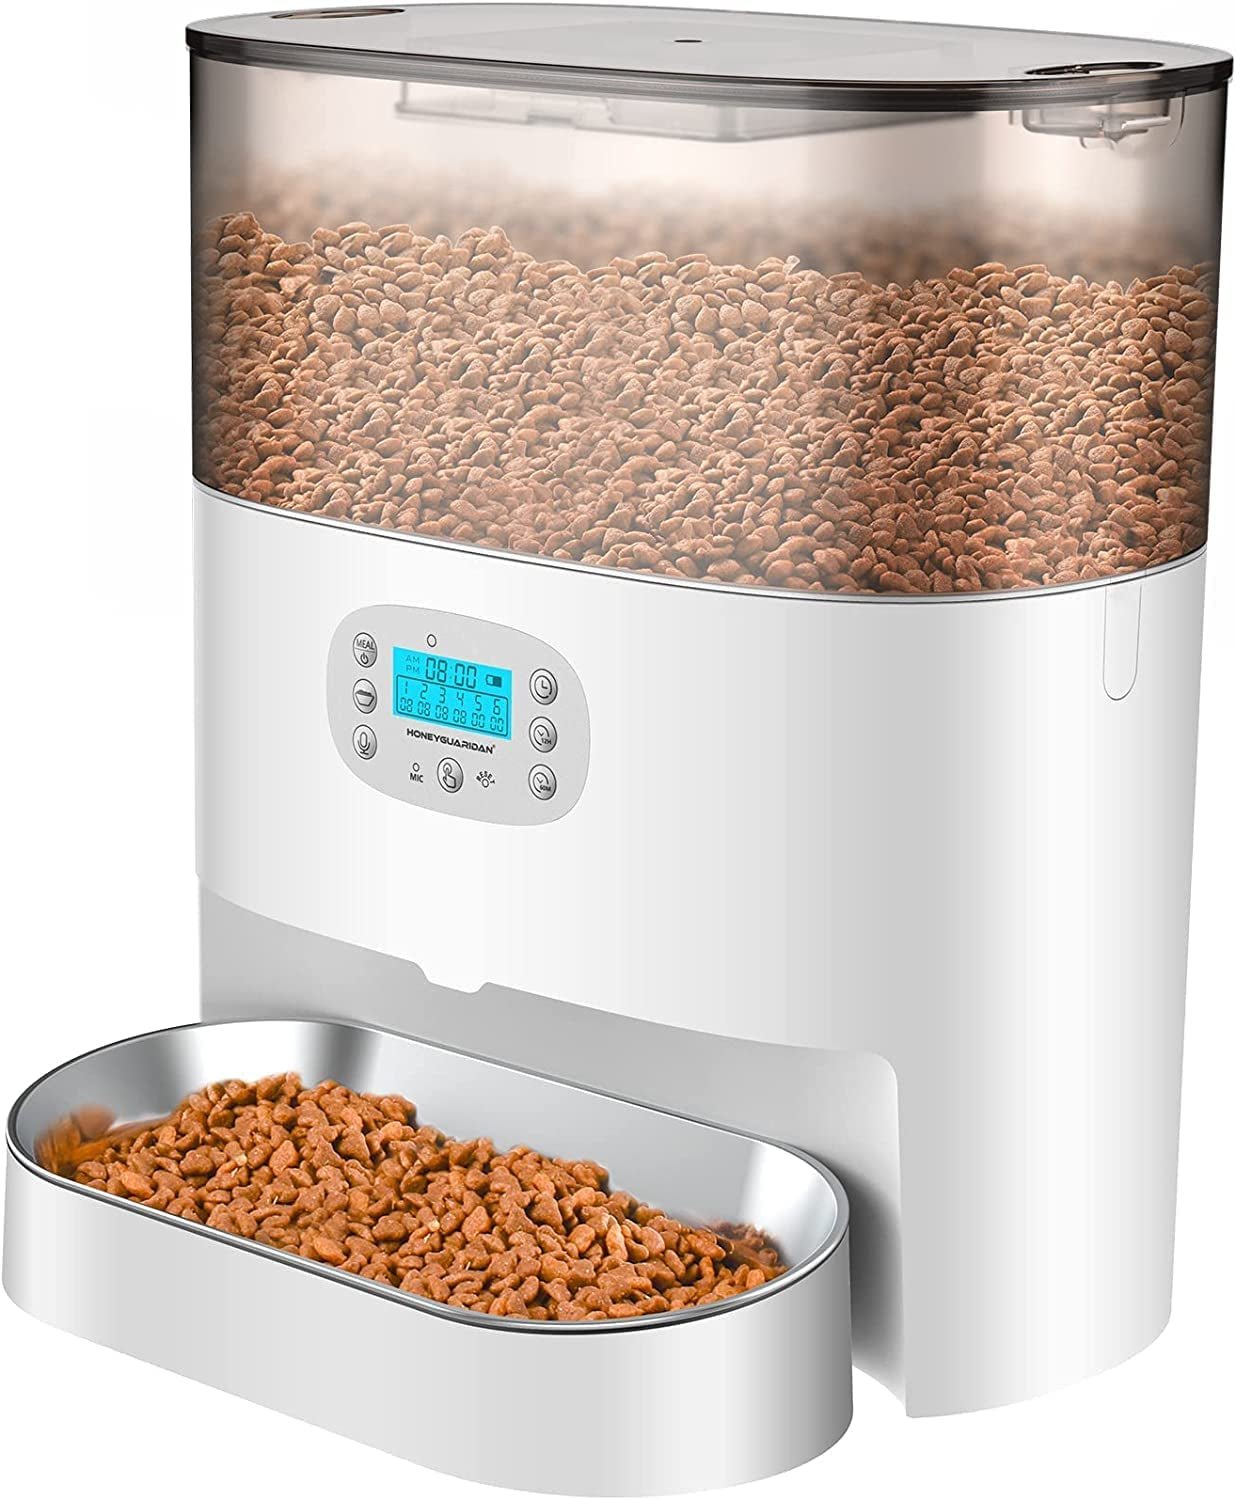 Honeyguaridan Automatic Cat Feeder, Pet Feeder for Cat and Dog with Desiccant Box, 6L Food Dispenser with Timer, 1-24 Portions Control, Voice Recorder, Dual Power Supply - up to 6 Meals a Day - FoxMart™️ - A56